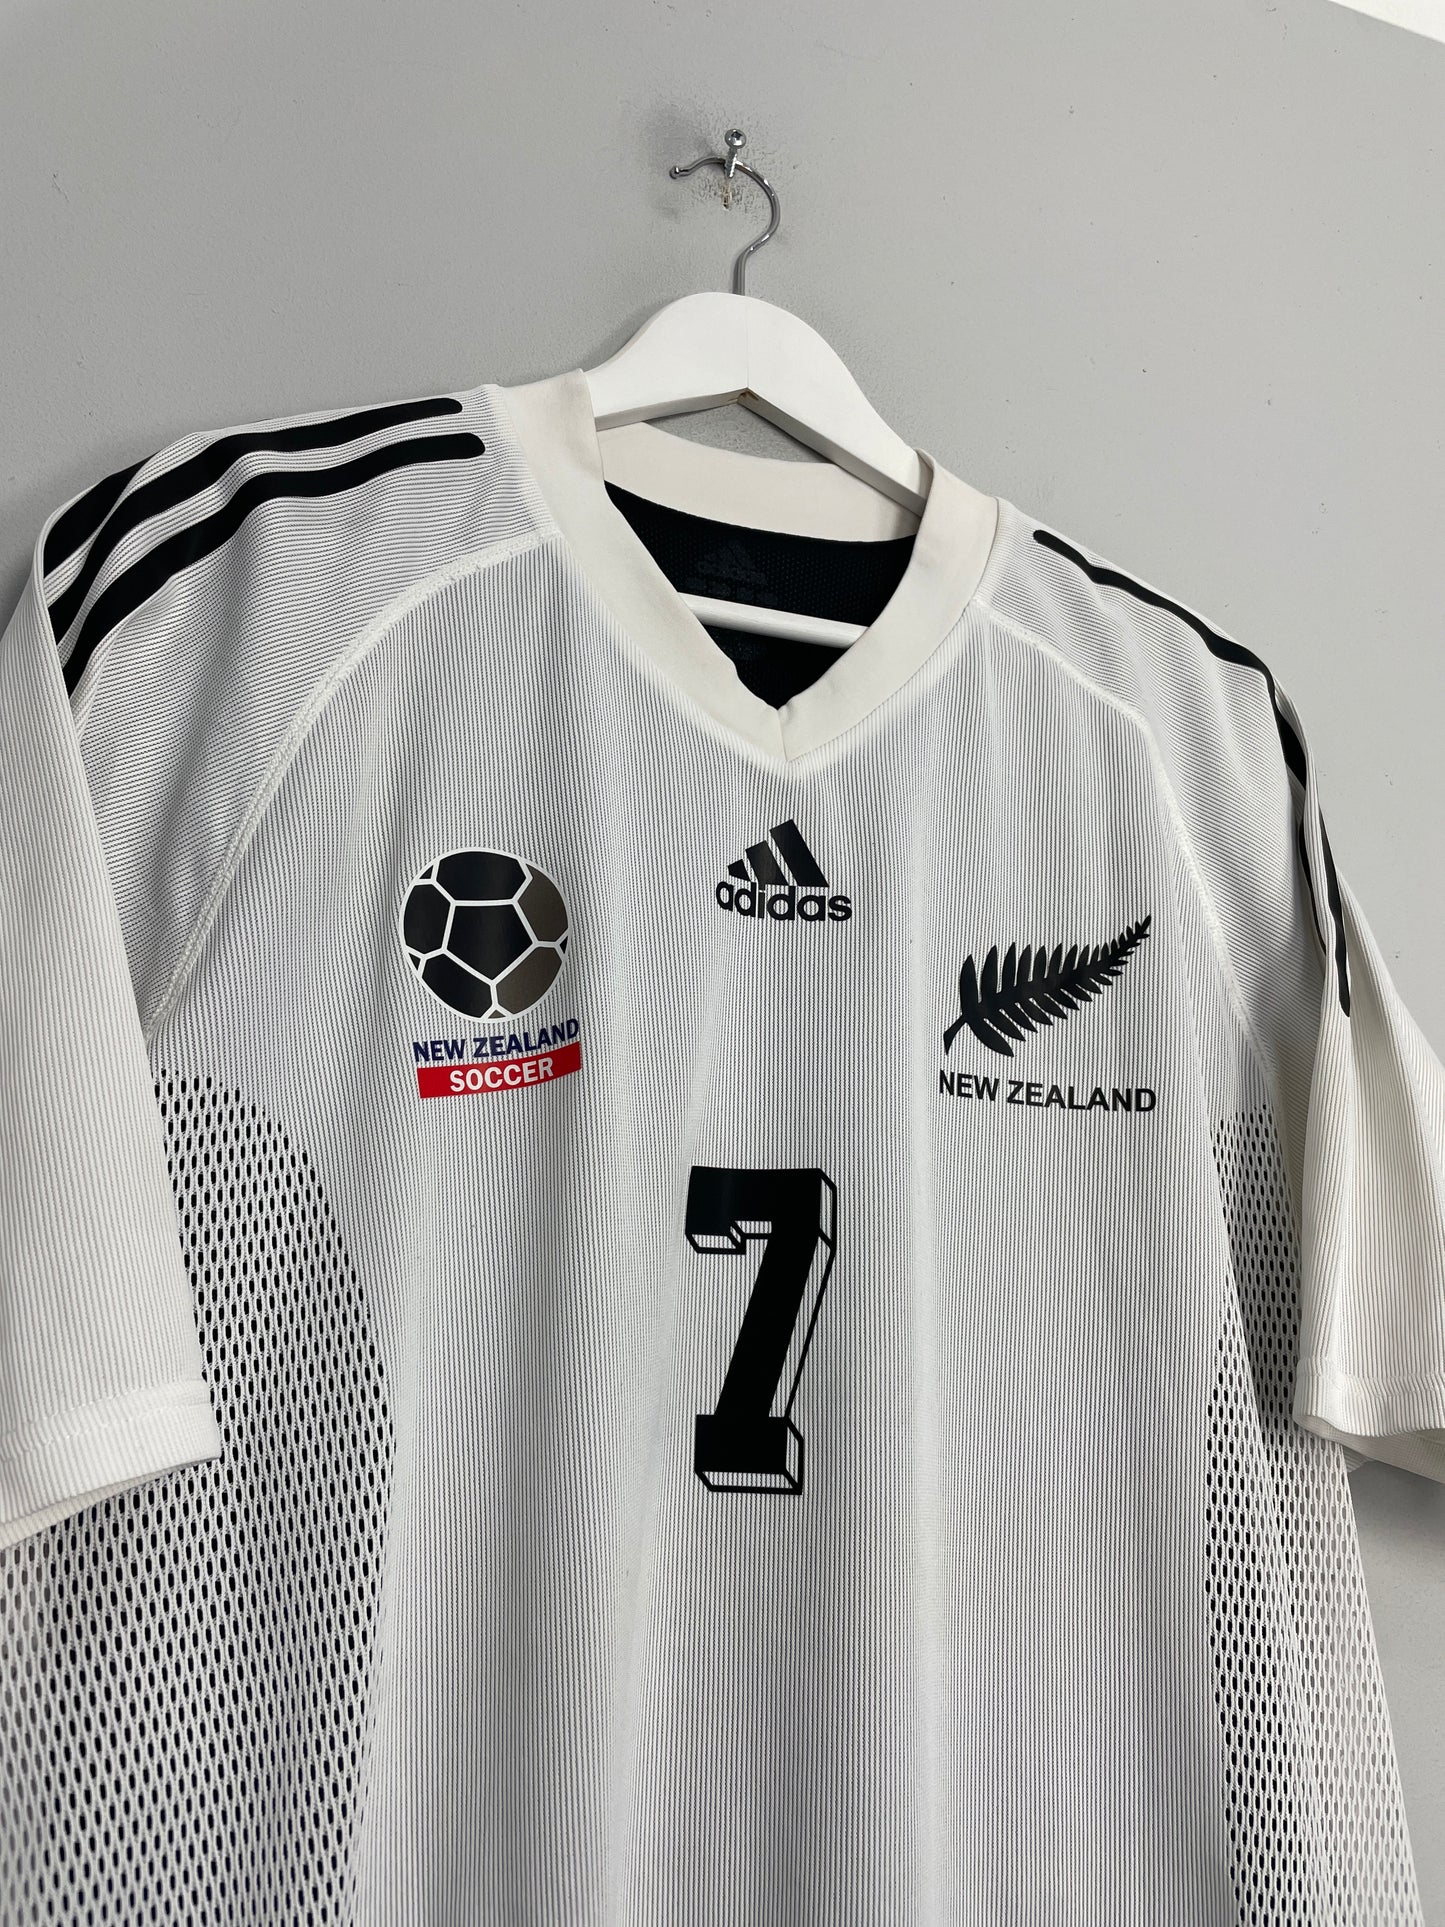 2003/04 NEW ZEALAND VICELICH #7 *PLAYER ISSUE* HOME SHIRT (XL) ADIDAS